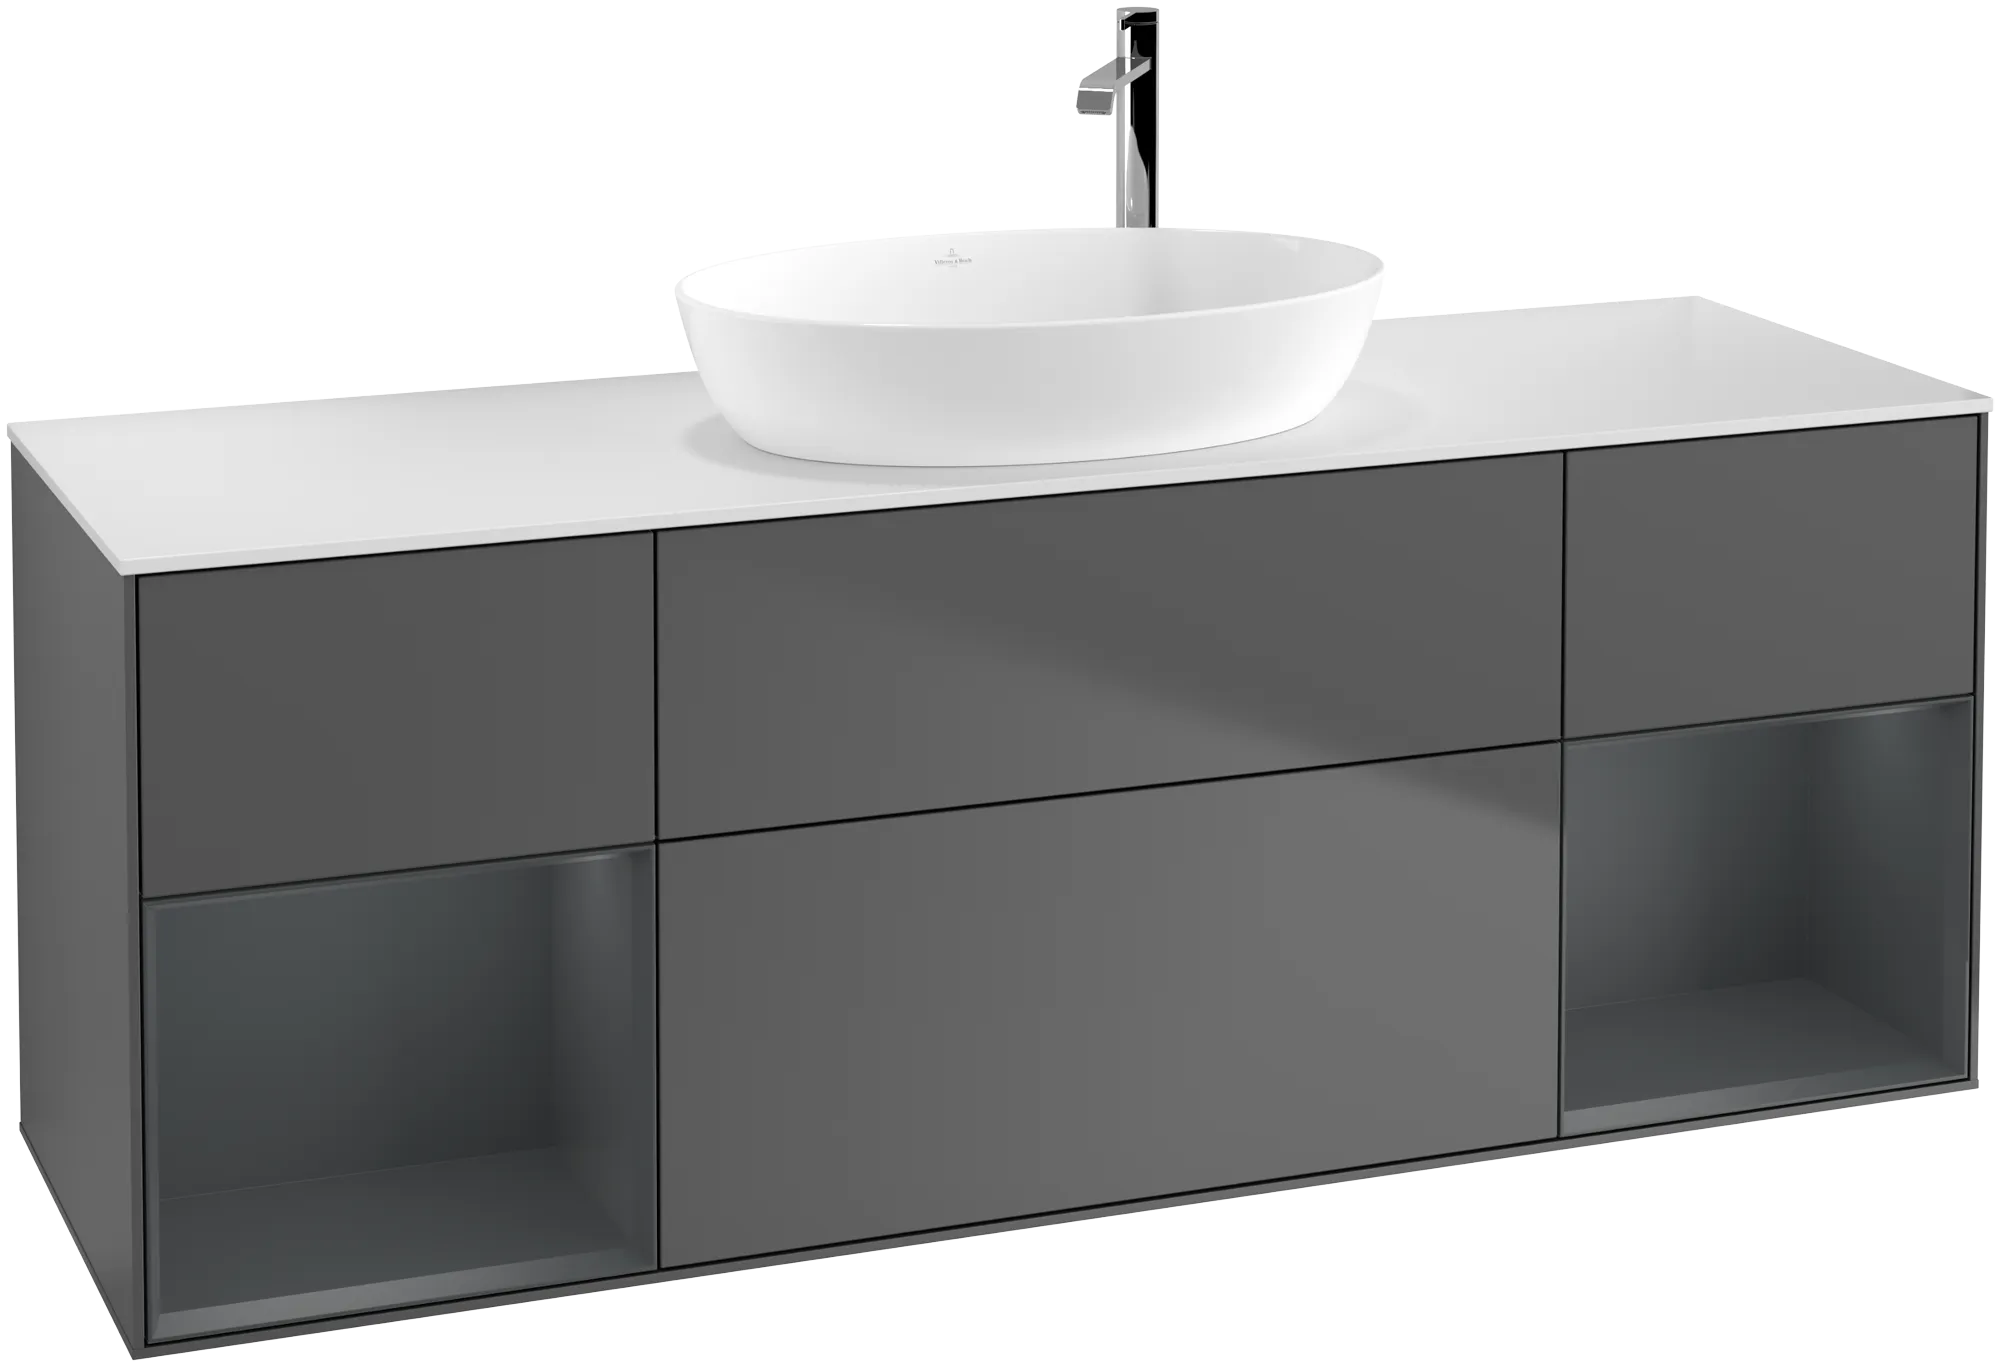 VILLEROY BOCH Finion Vanity unit, with lighting, 4 pull-out compartments, 1600 x 603 x 501 mm, Anthracite Matt Lacquer / Midnight Blue Matt Lacquer / Glass White Matt #G981HGGK resmi